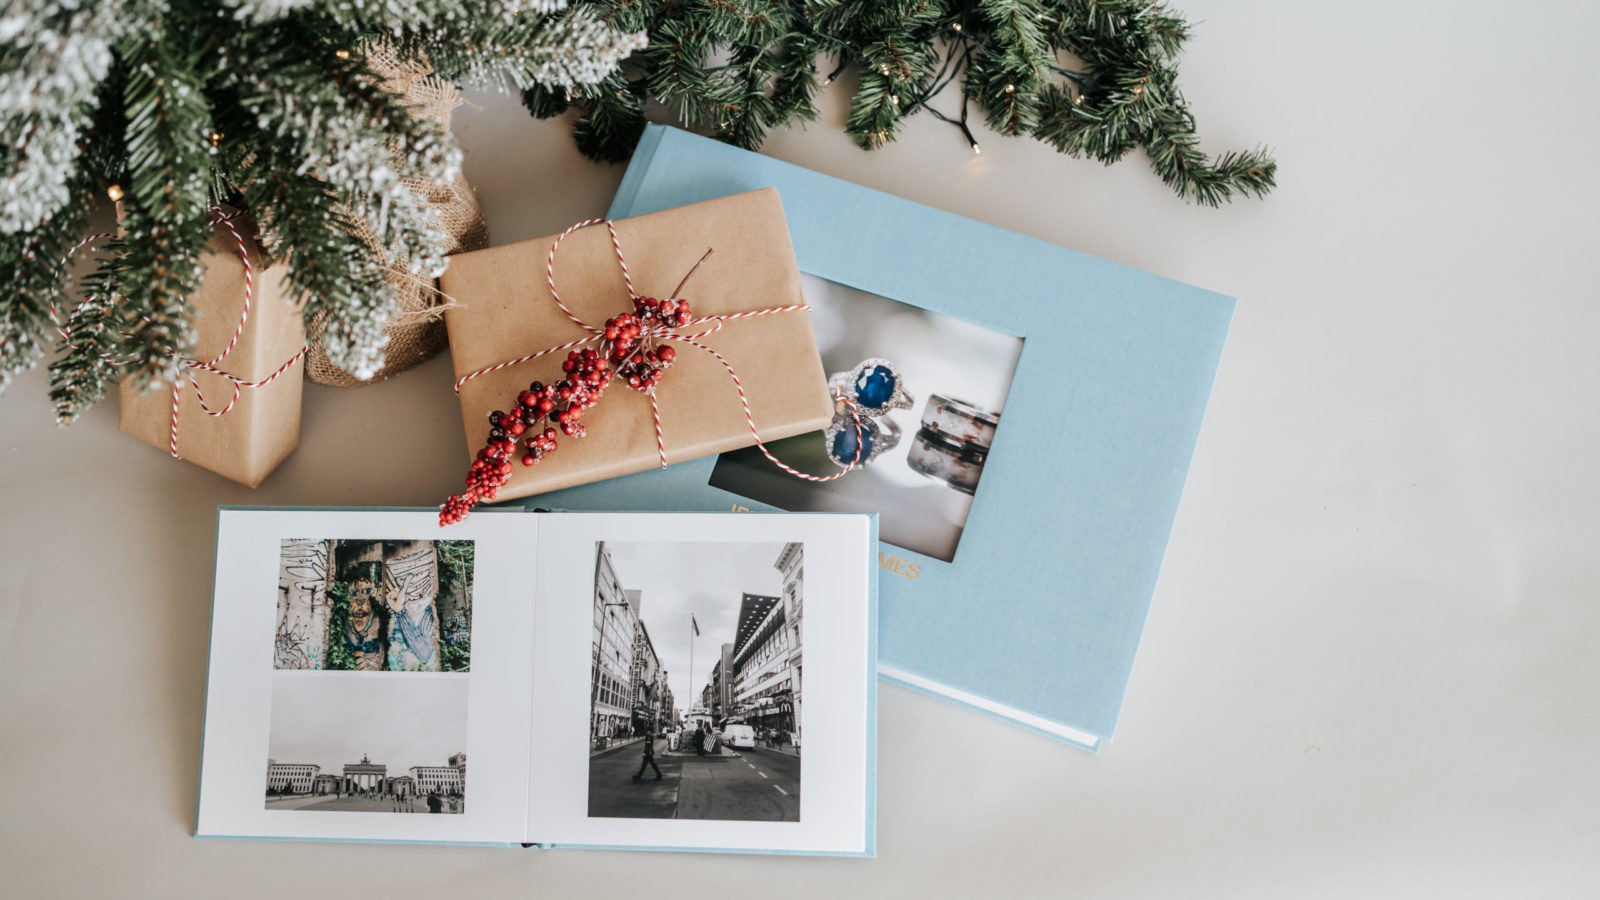 Holiday Gift Planning 101 for Photo Albums - Photo Book Design Ideas